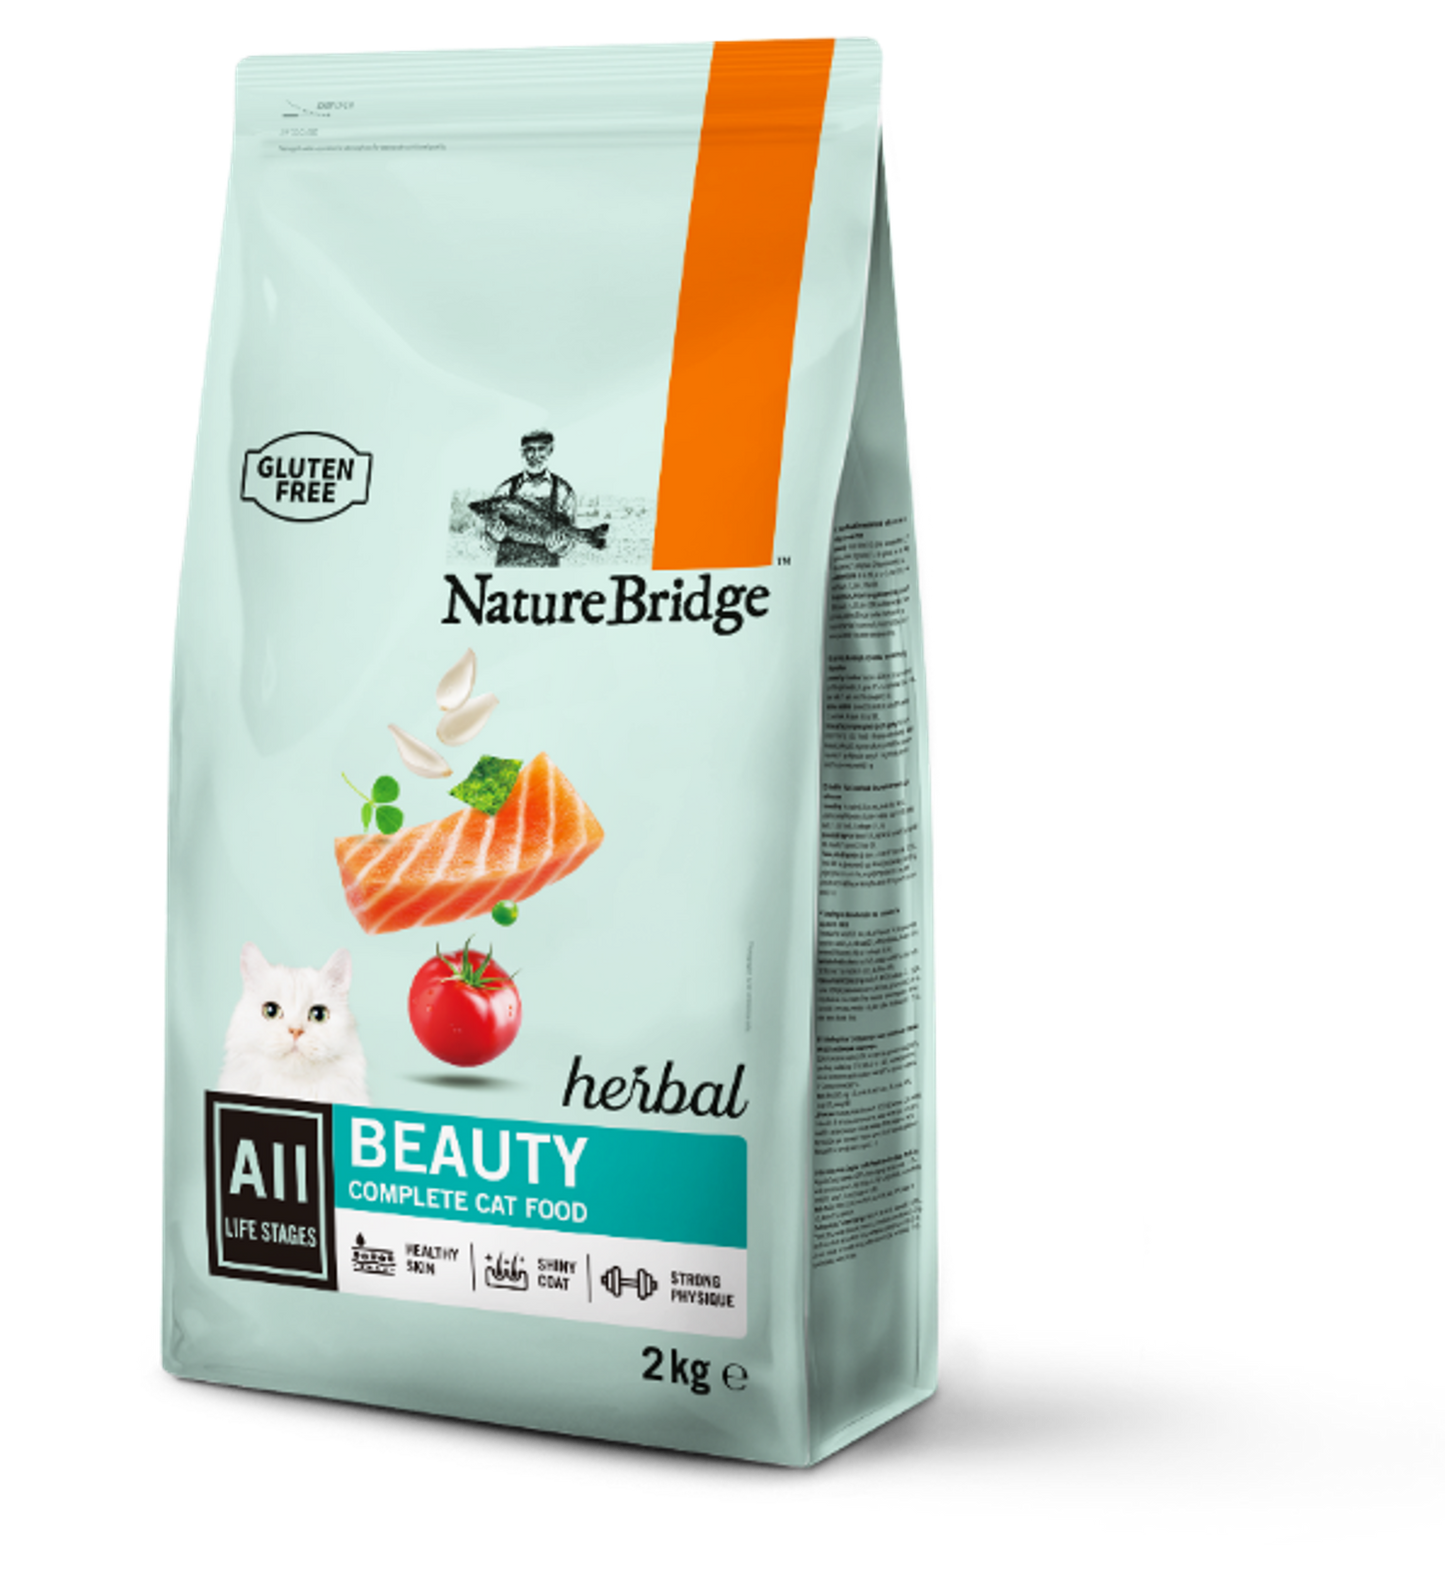 NatureBridge Beauty Cat-Complete Food-All Life Stages